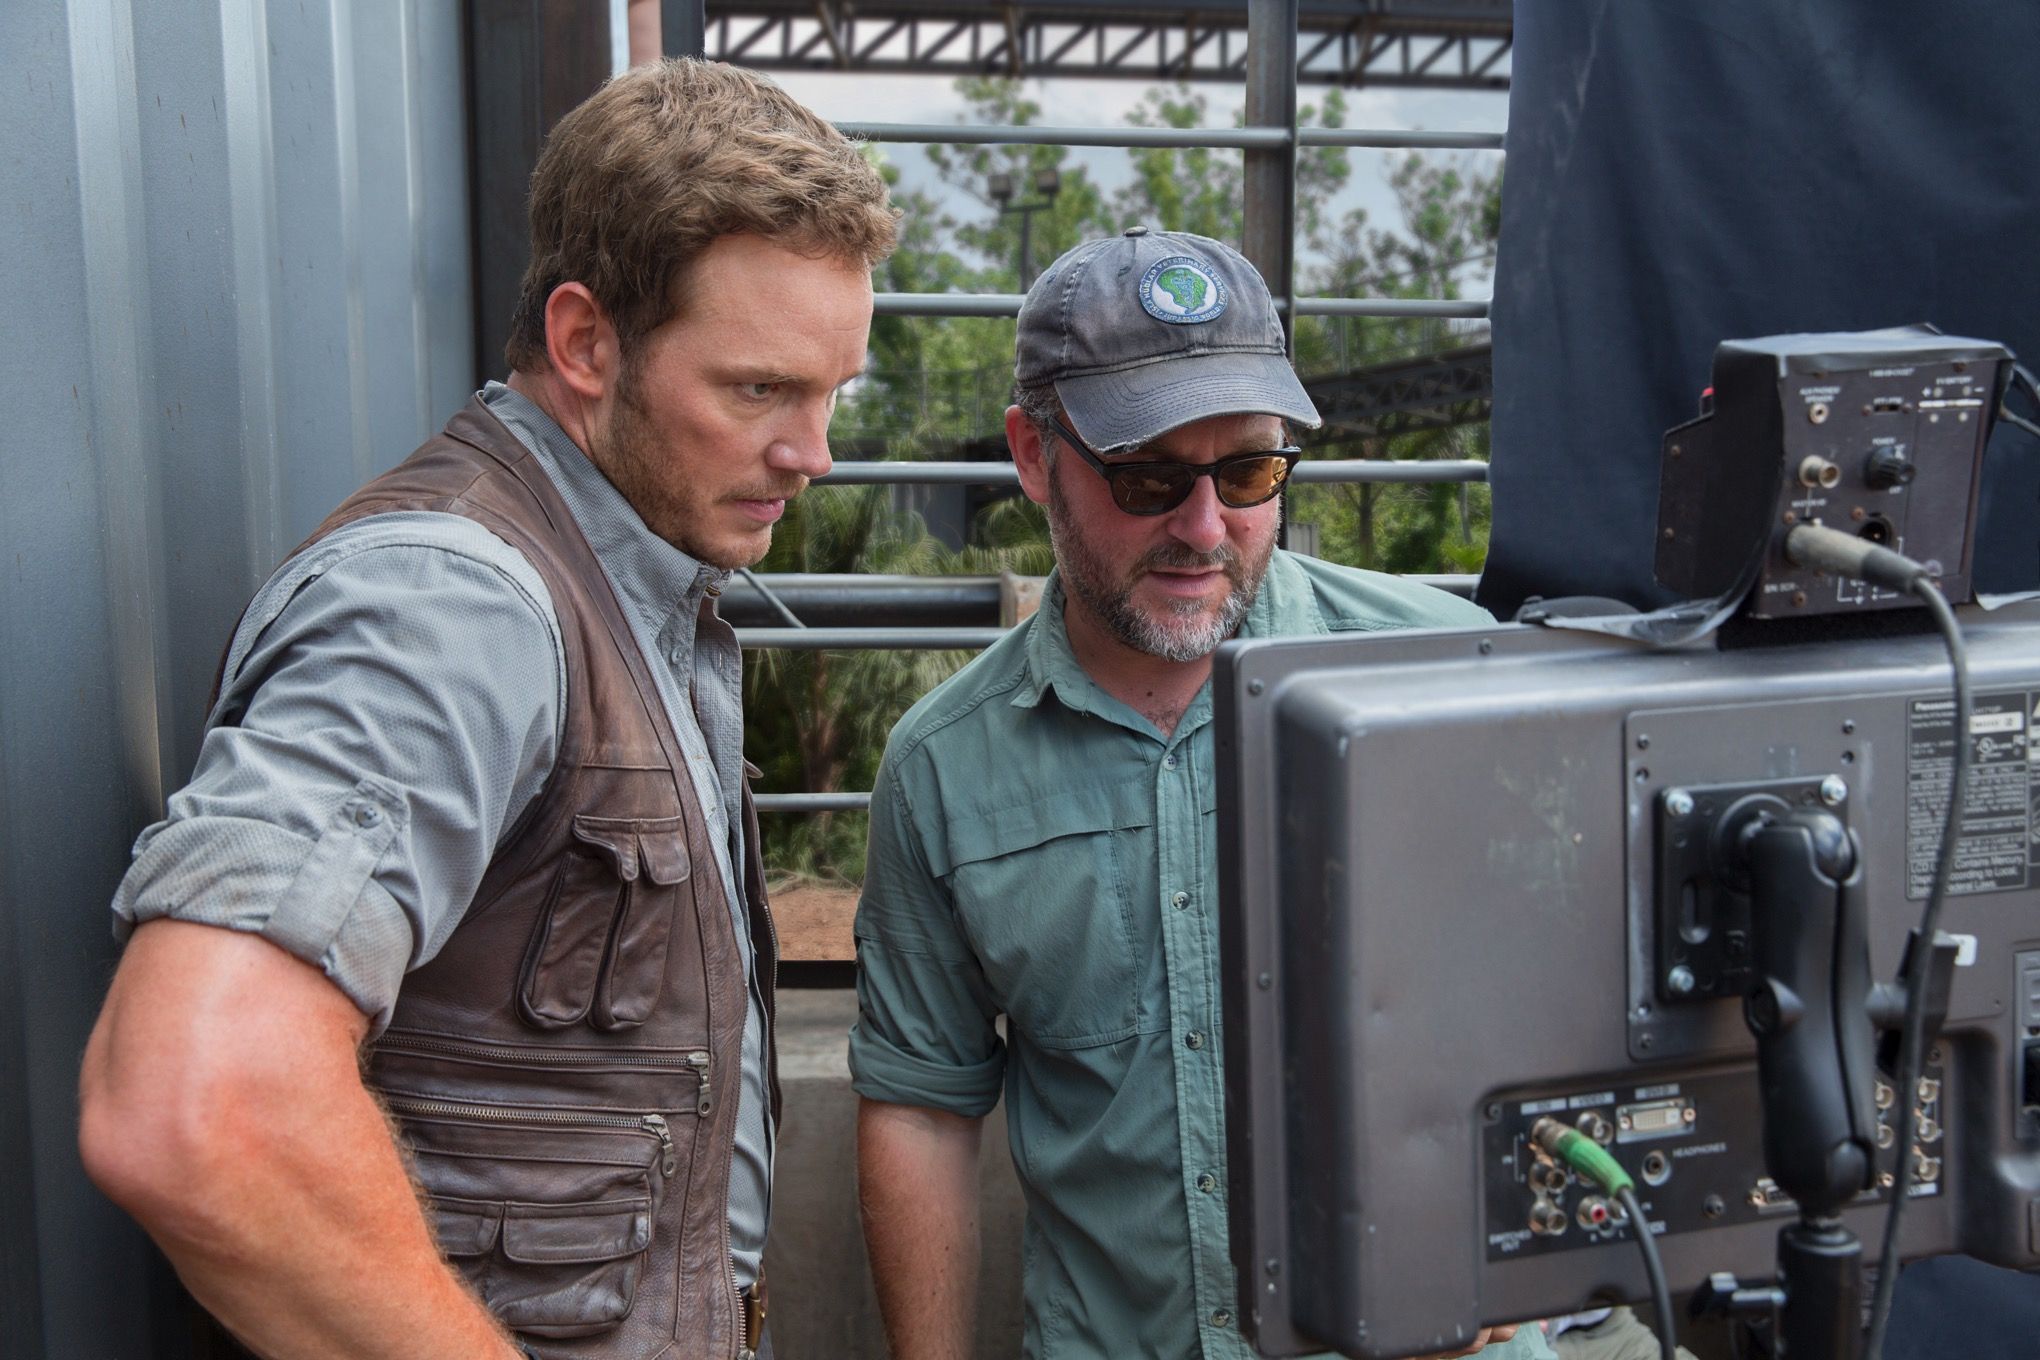 'Jurassic World 2': Colin Trevorrow on Crafting “A Spanish Horror Thriller with Dinosaurs” - Collider.com